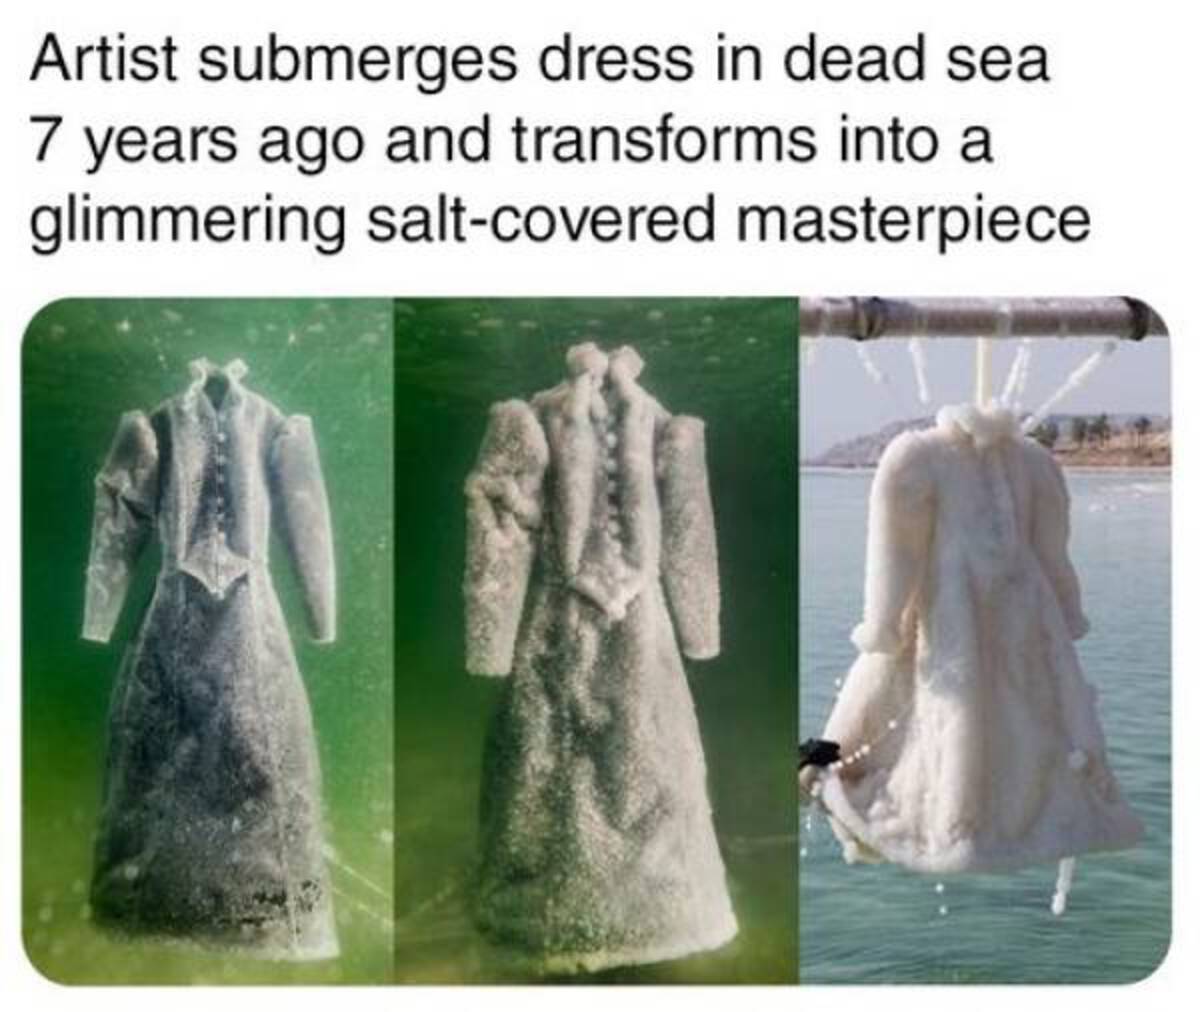 fur - Artist submerges dress in dead sea 7 years ago and transforms into a glimmering saltcovered masterpiece